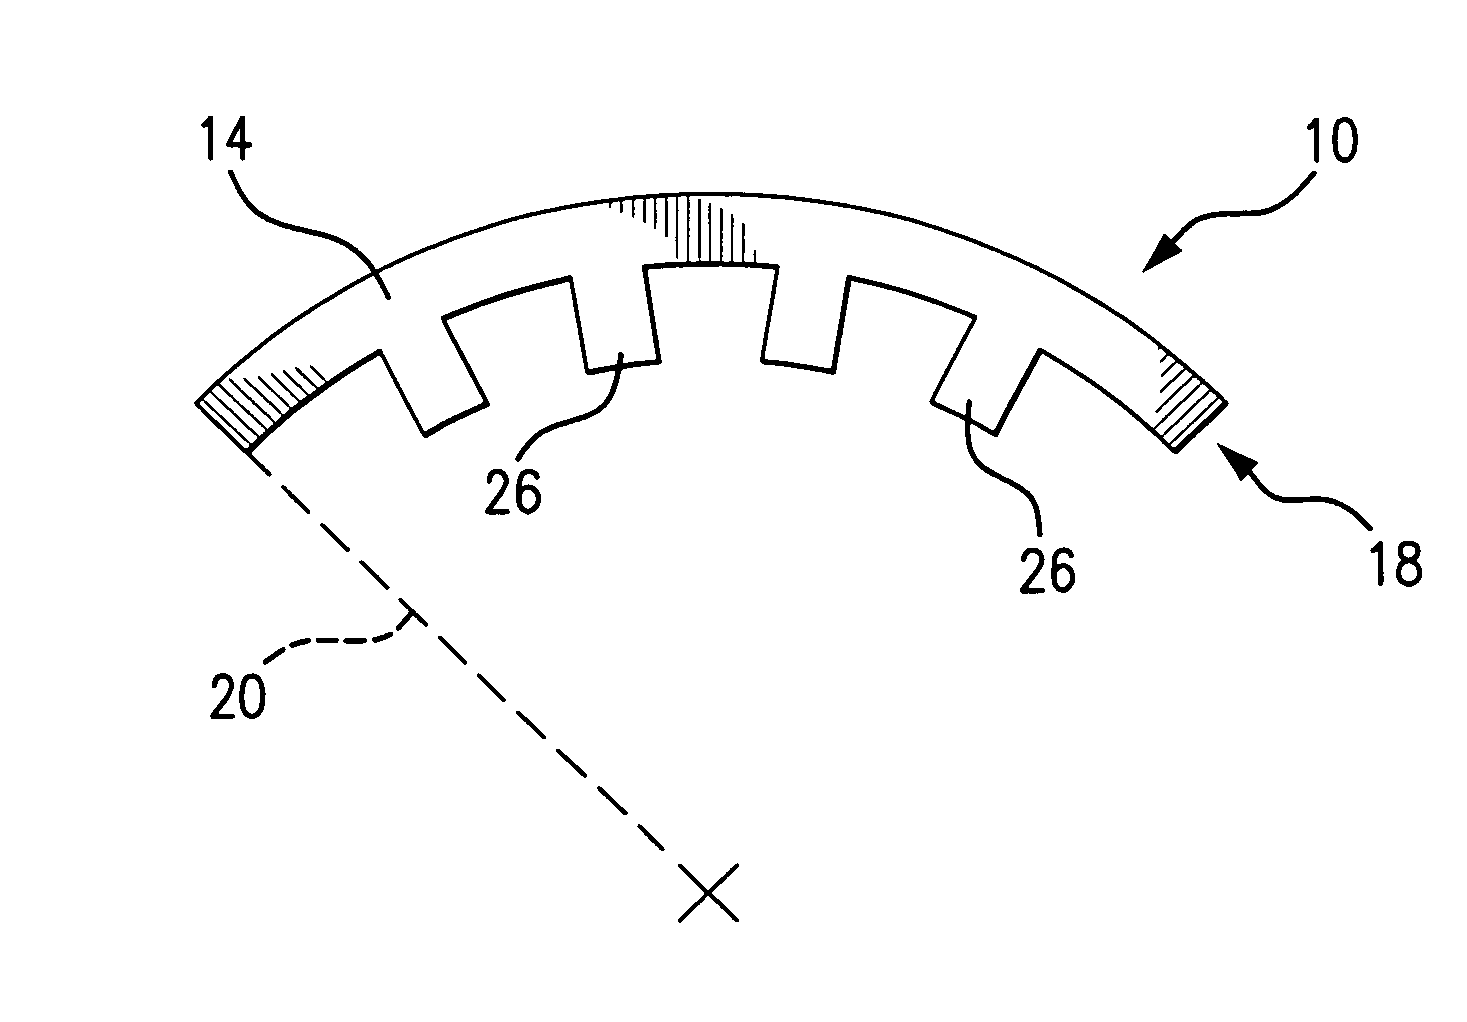 Apparatus and method for imprinting a curved pathway in concrete